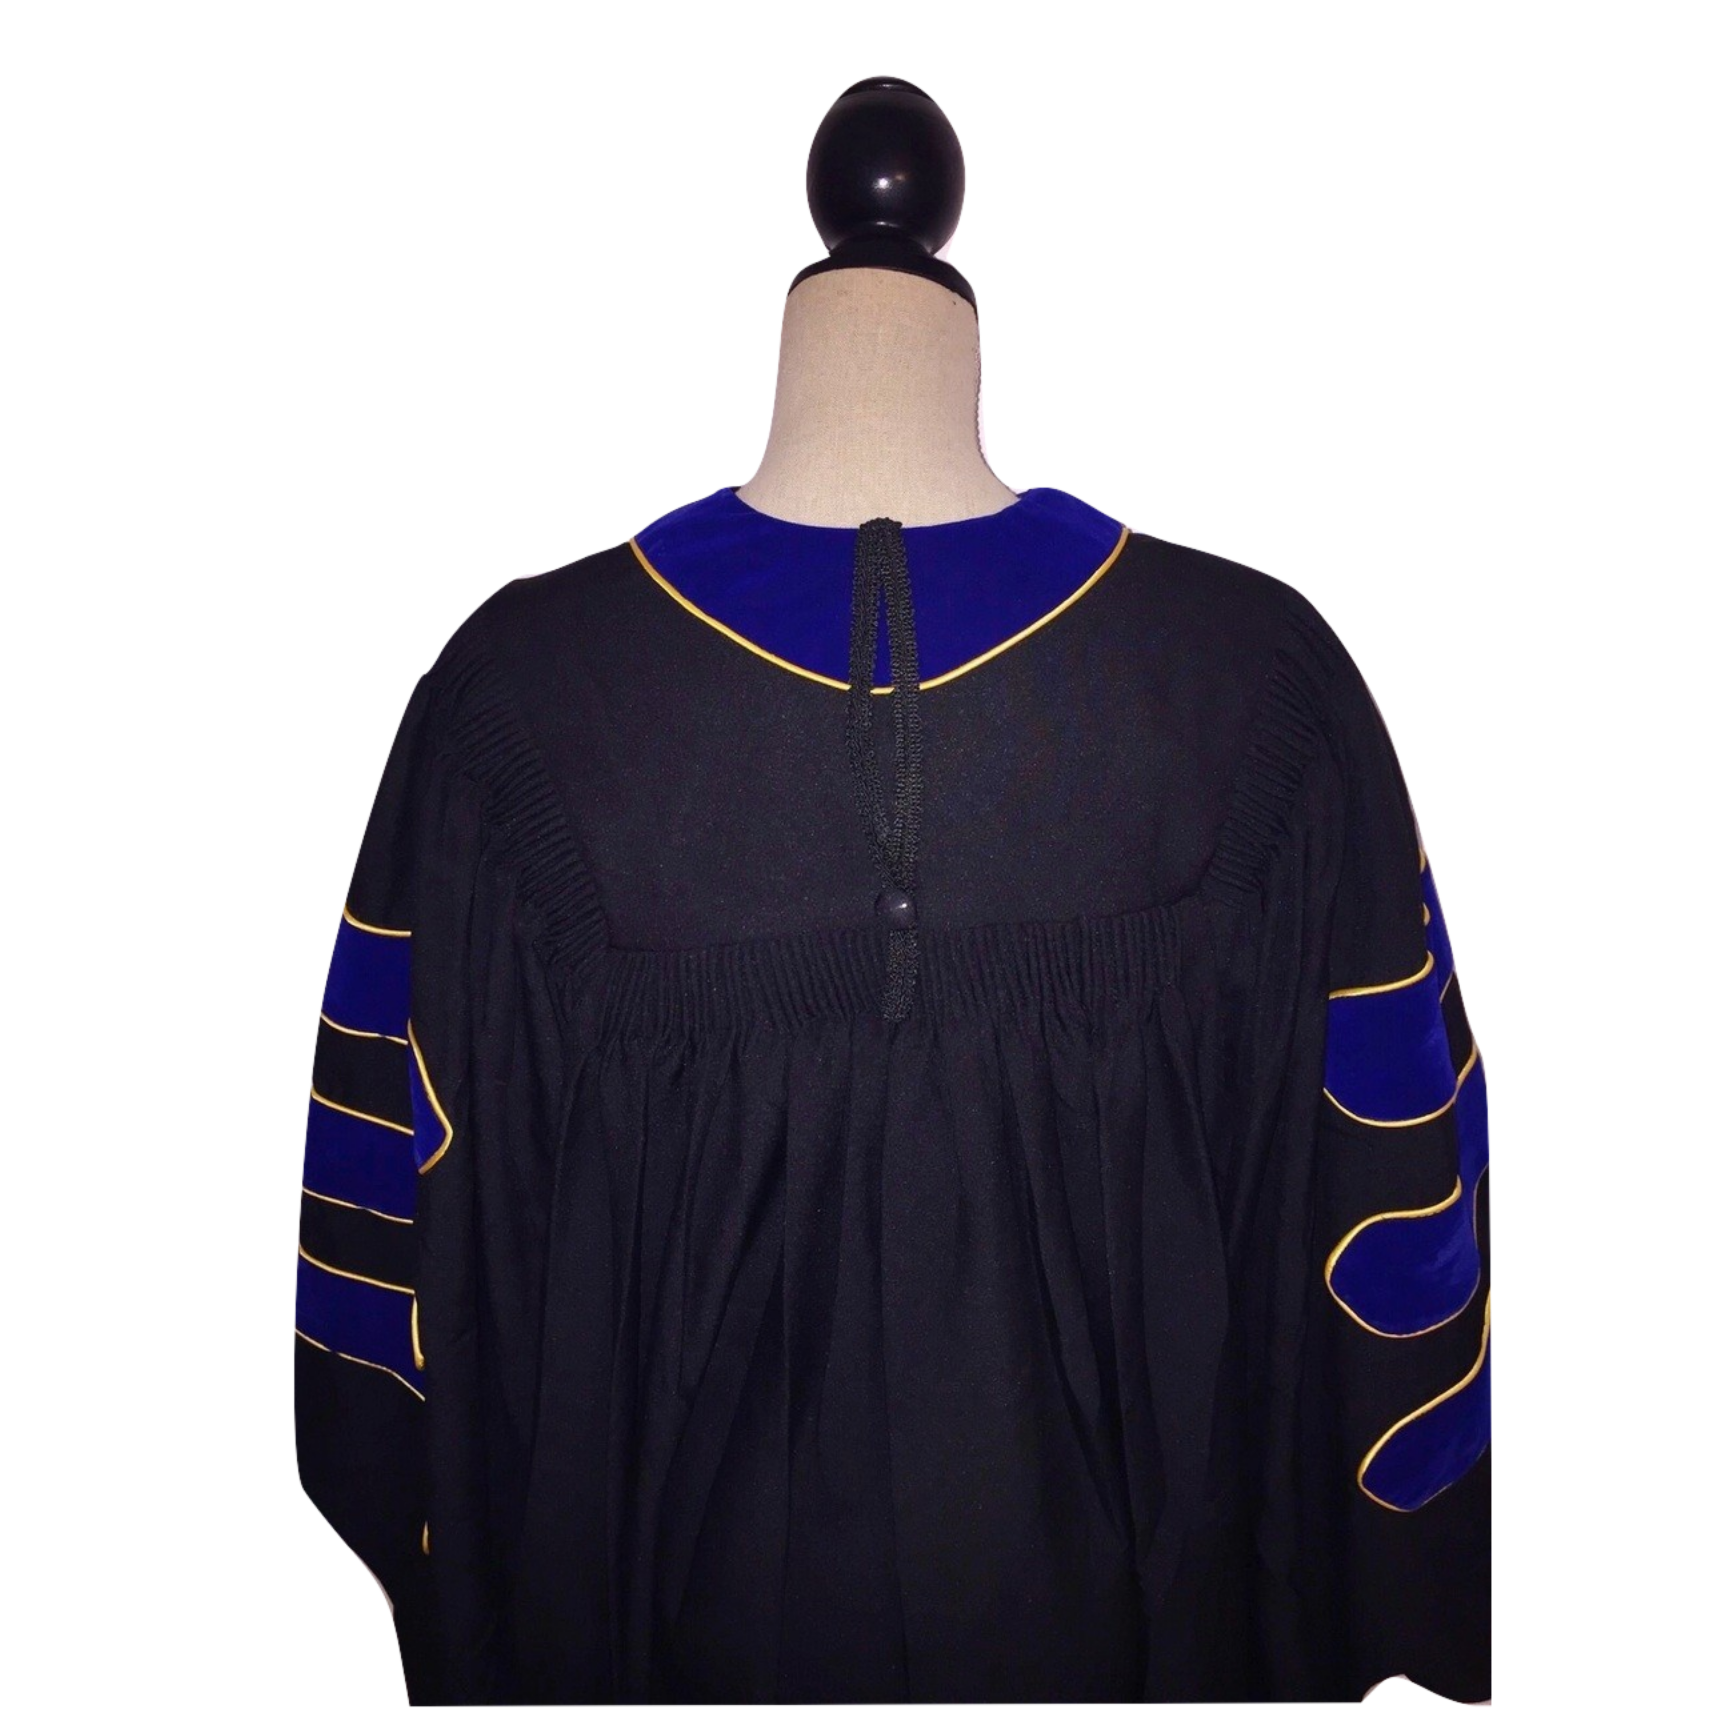 Doctor of Theology Doctoral Gown Academic Regalia - Etsy